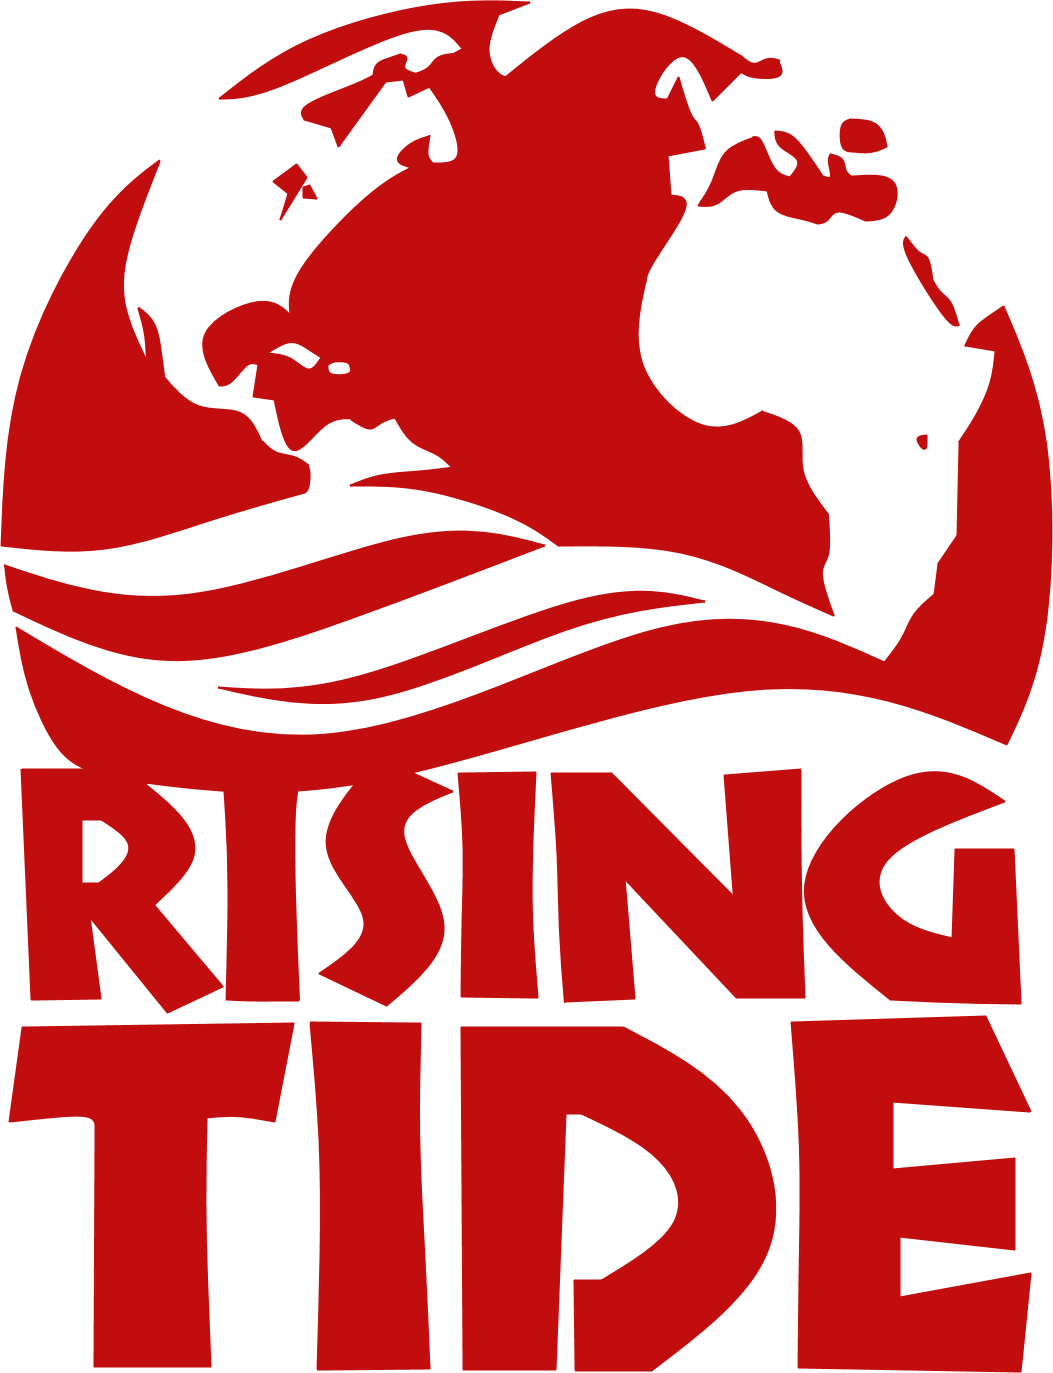 The Rising Tide for Good